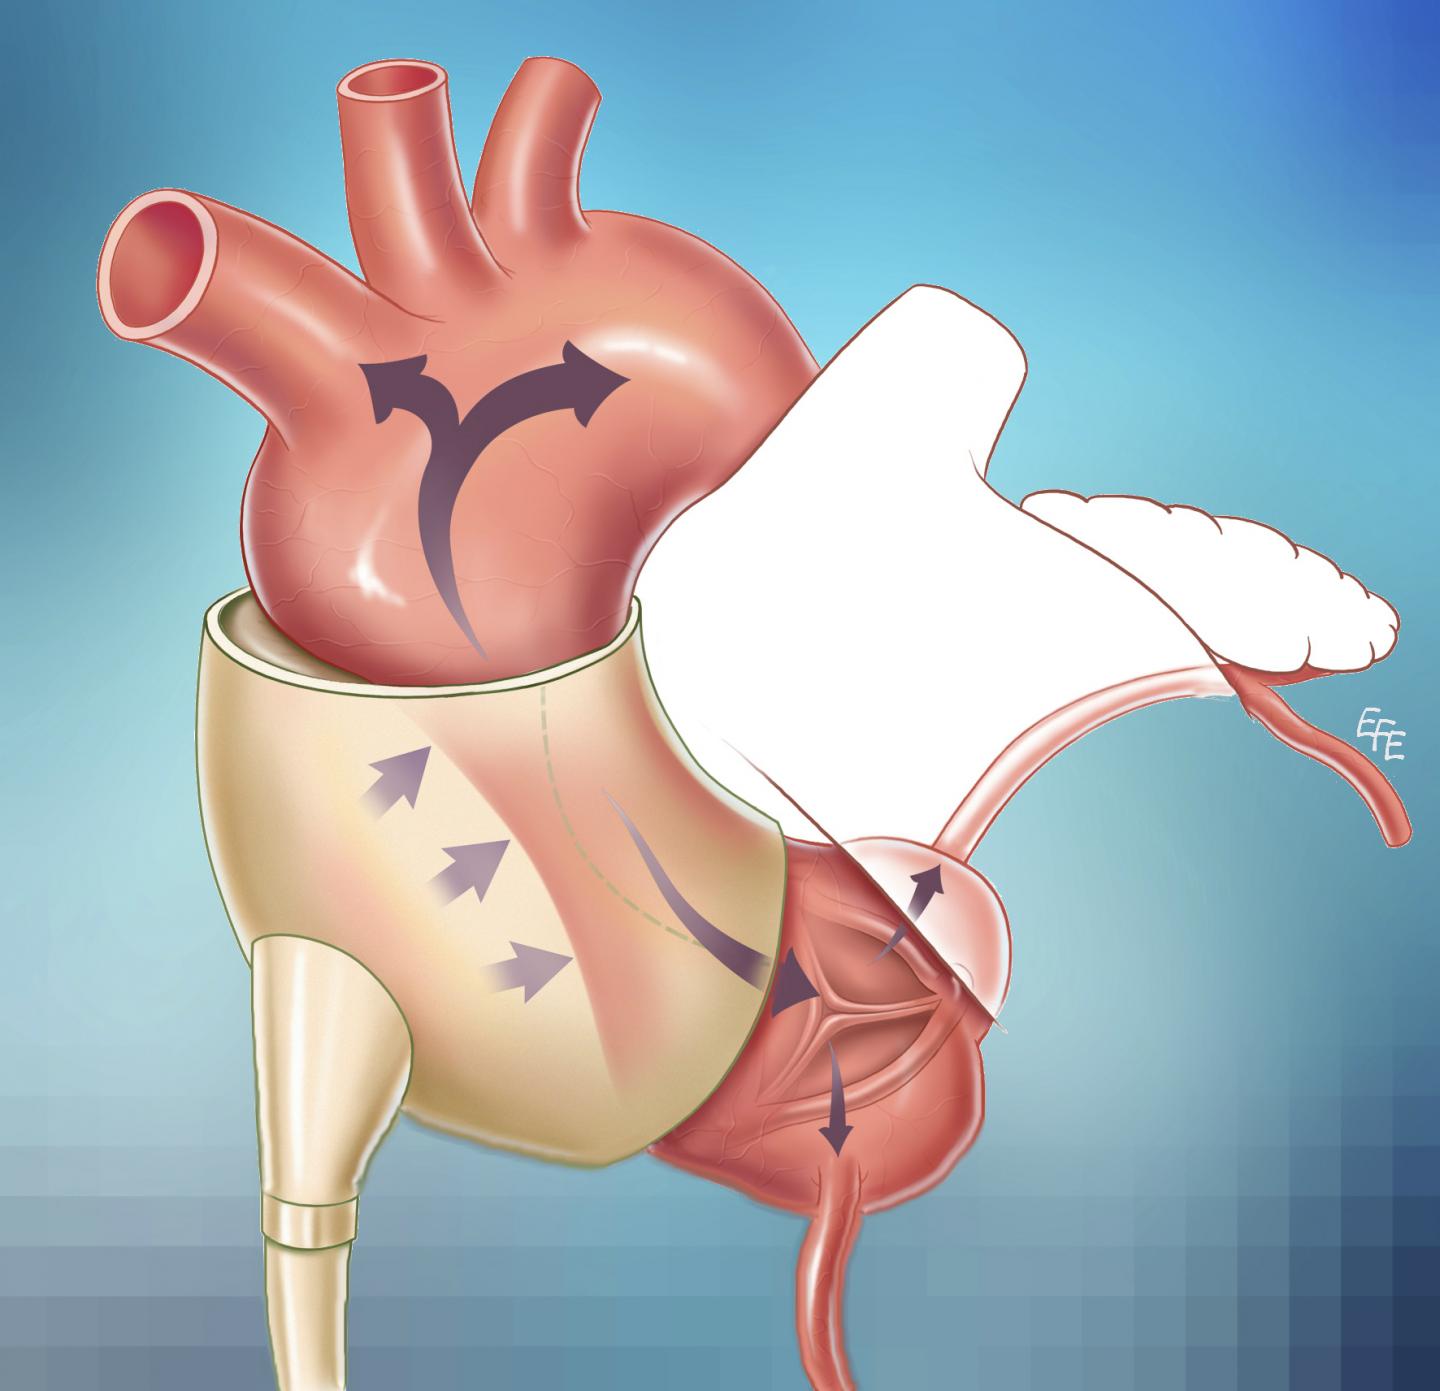 Implanted Cuff around the Aorta Could Be Breakthrough in Heart Failure Therapy